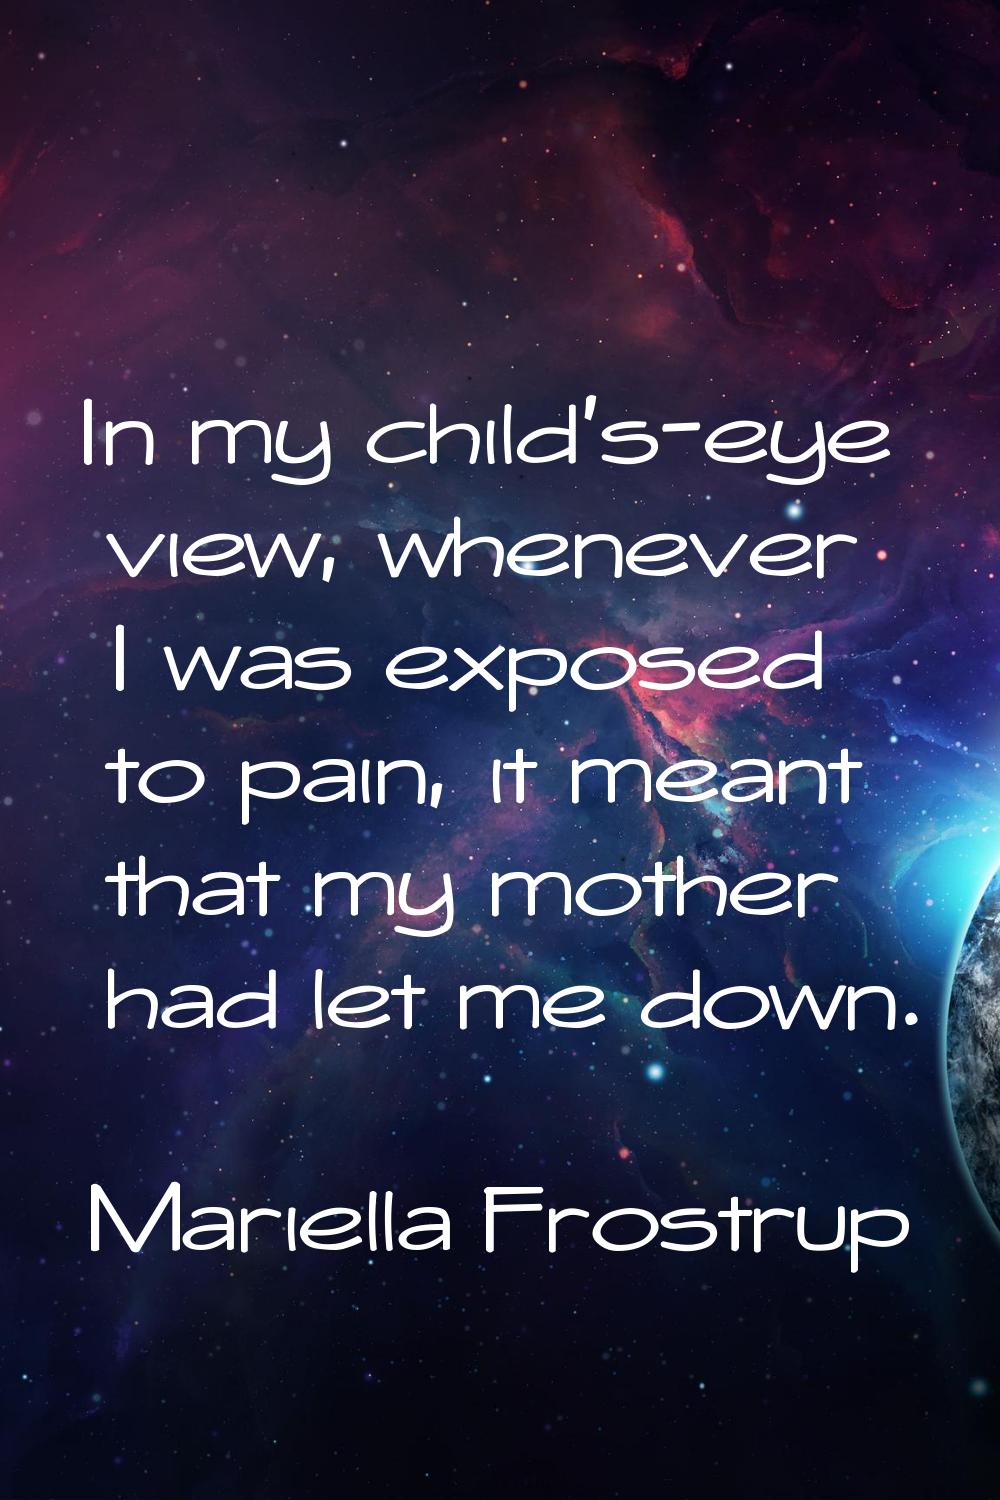 In my child's-eye view, whenever I was exposed to pain, it meant that my mother had let me down.